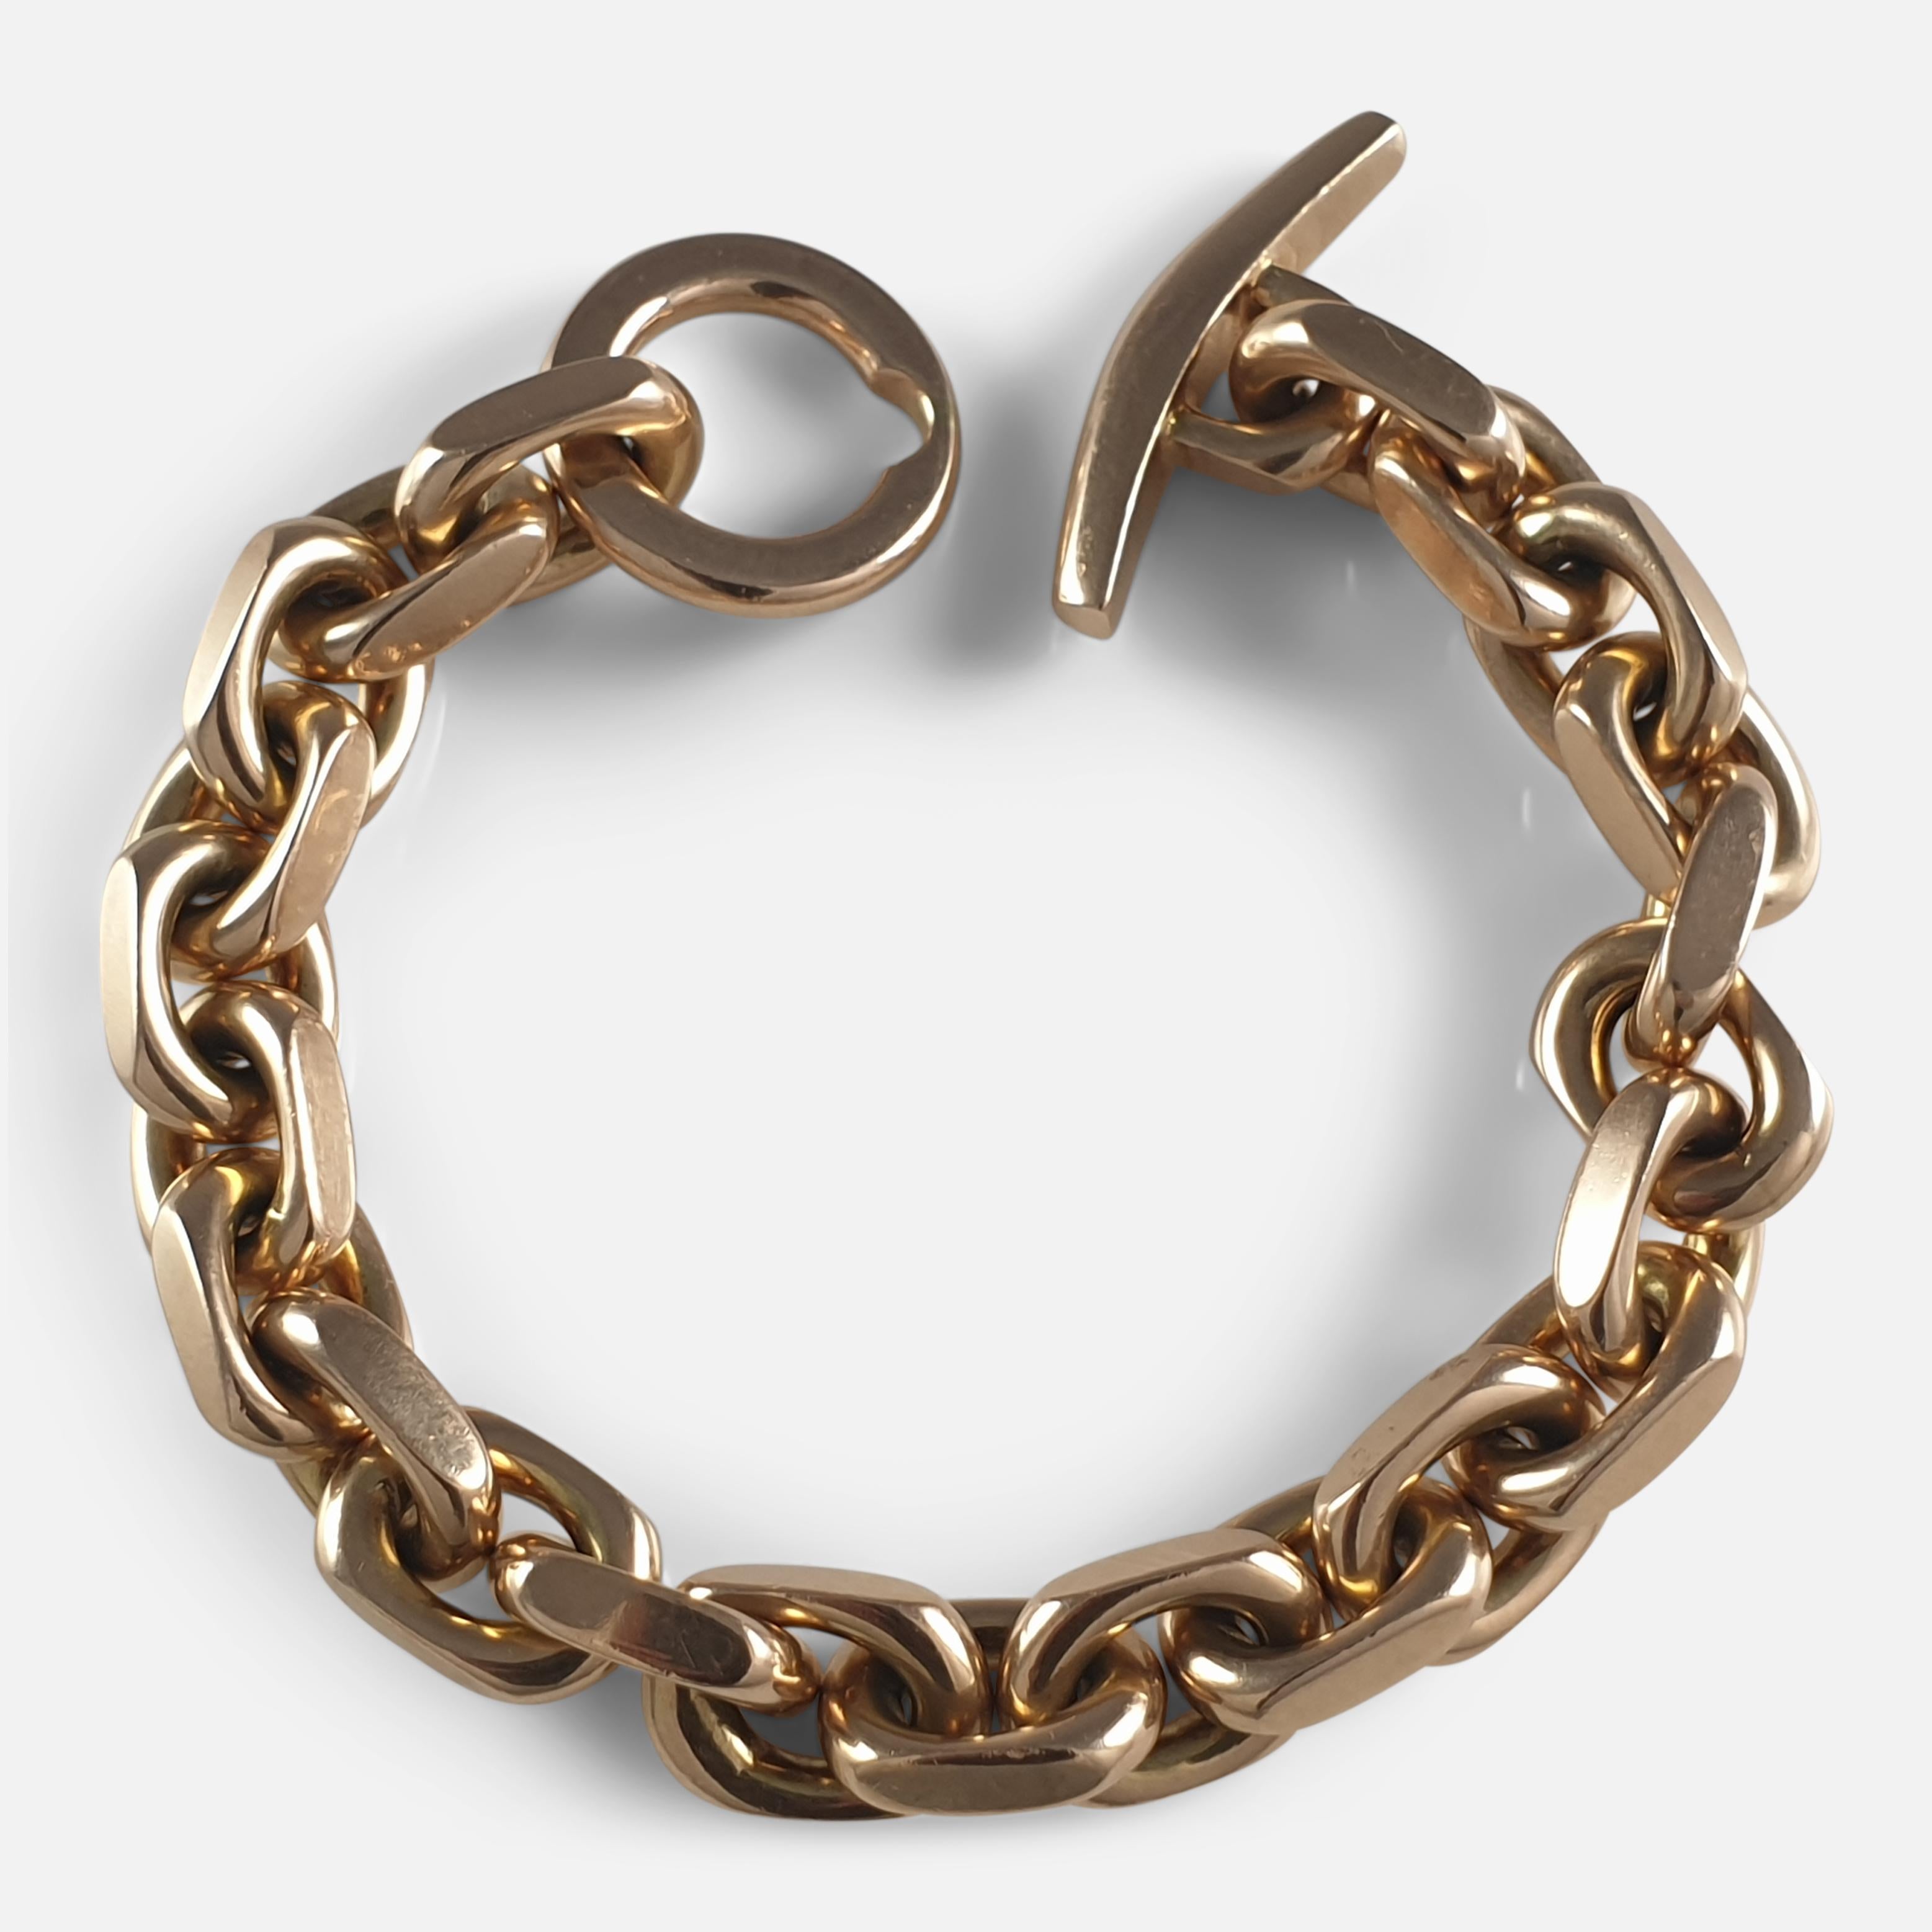 A Danish 14k yellow gold marine anchor link bracelet by Hans Hansen.  The bracelet is stamped with the 'Hans Hansen' facsimile mark, '585', and 'Denmark'. The bracelet is UK hallmarked, stamped '585' to denote 14 karat (carat) gold. The bracelet can